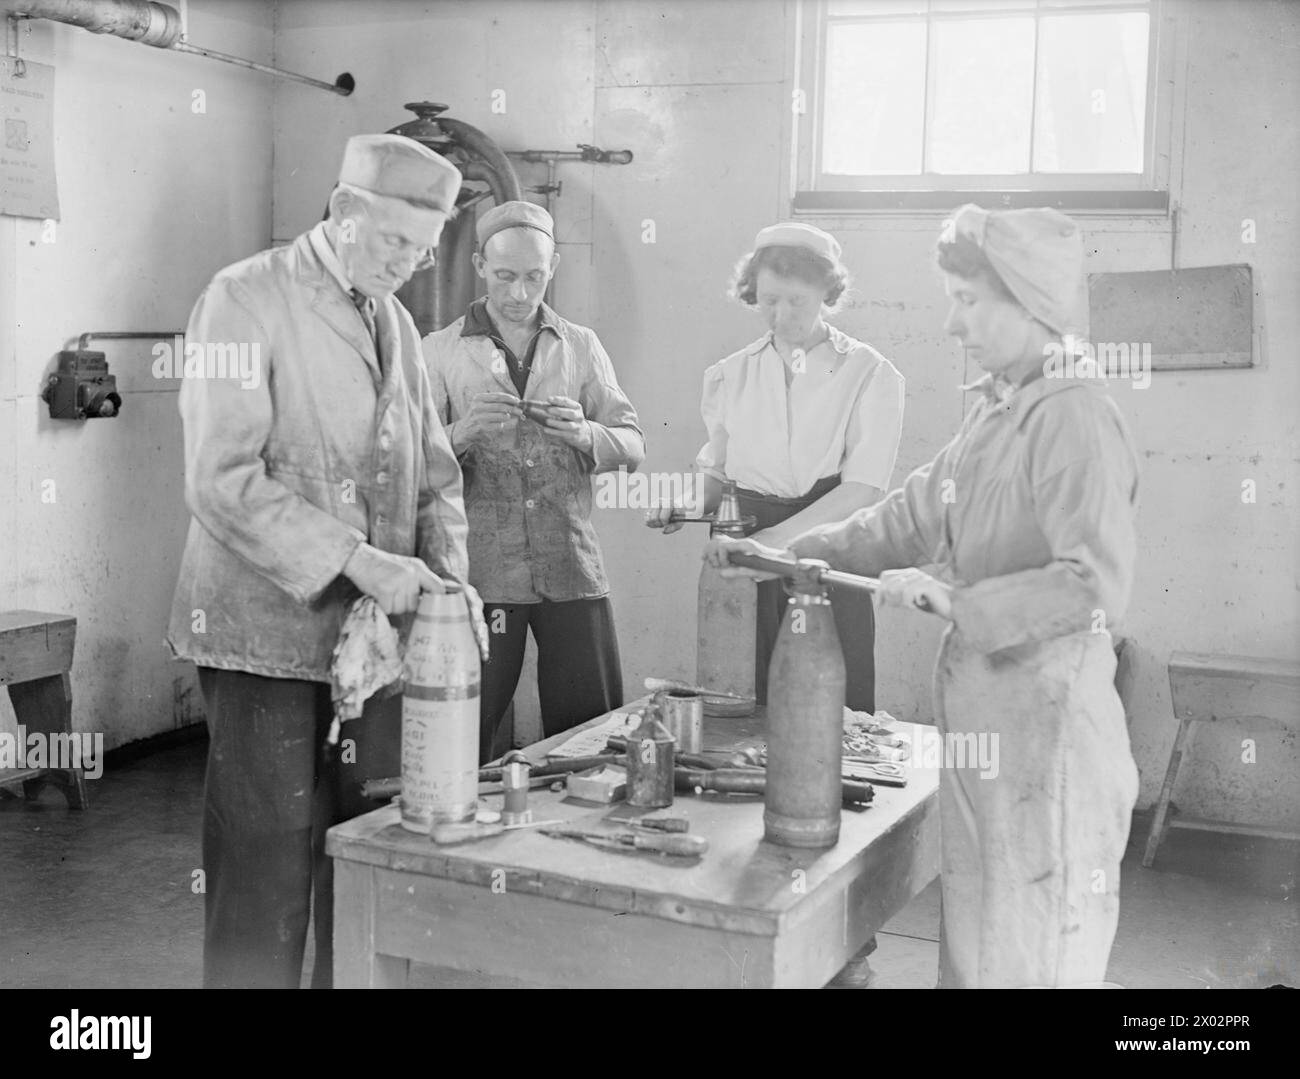 MEN AND WOMEN BEHIND THE GUNS OF THE BRITISH NAVY. 25 TO 30 JULY 1944, AT VARIOUS ARMAMENT DEPOTS AND FACTORIES IN THE SOUTH OF ENGLAND (PRIDDY'S HARD, DEAN'S HILL, MILTON HEATH, AND BATH). SOME OF THE EMPLOYEES OF THE ARMAMENT SUPPLY DEPARTMENT OF THE ADMIRALTY. - Defusing shells from a damaged destroyer. Left to right: William Tillman; Ernest Goff, Chargehand, who has been in the department for 28 years; Mrs Margaret Bristow, wife of a Royal Marine; and Mrs Amy Harding, wife of an Able Seaman in the NELSON  Tillman, William Thomas, Goff, Ernest F Stock Photo